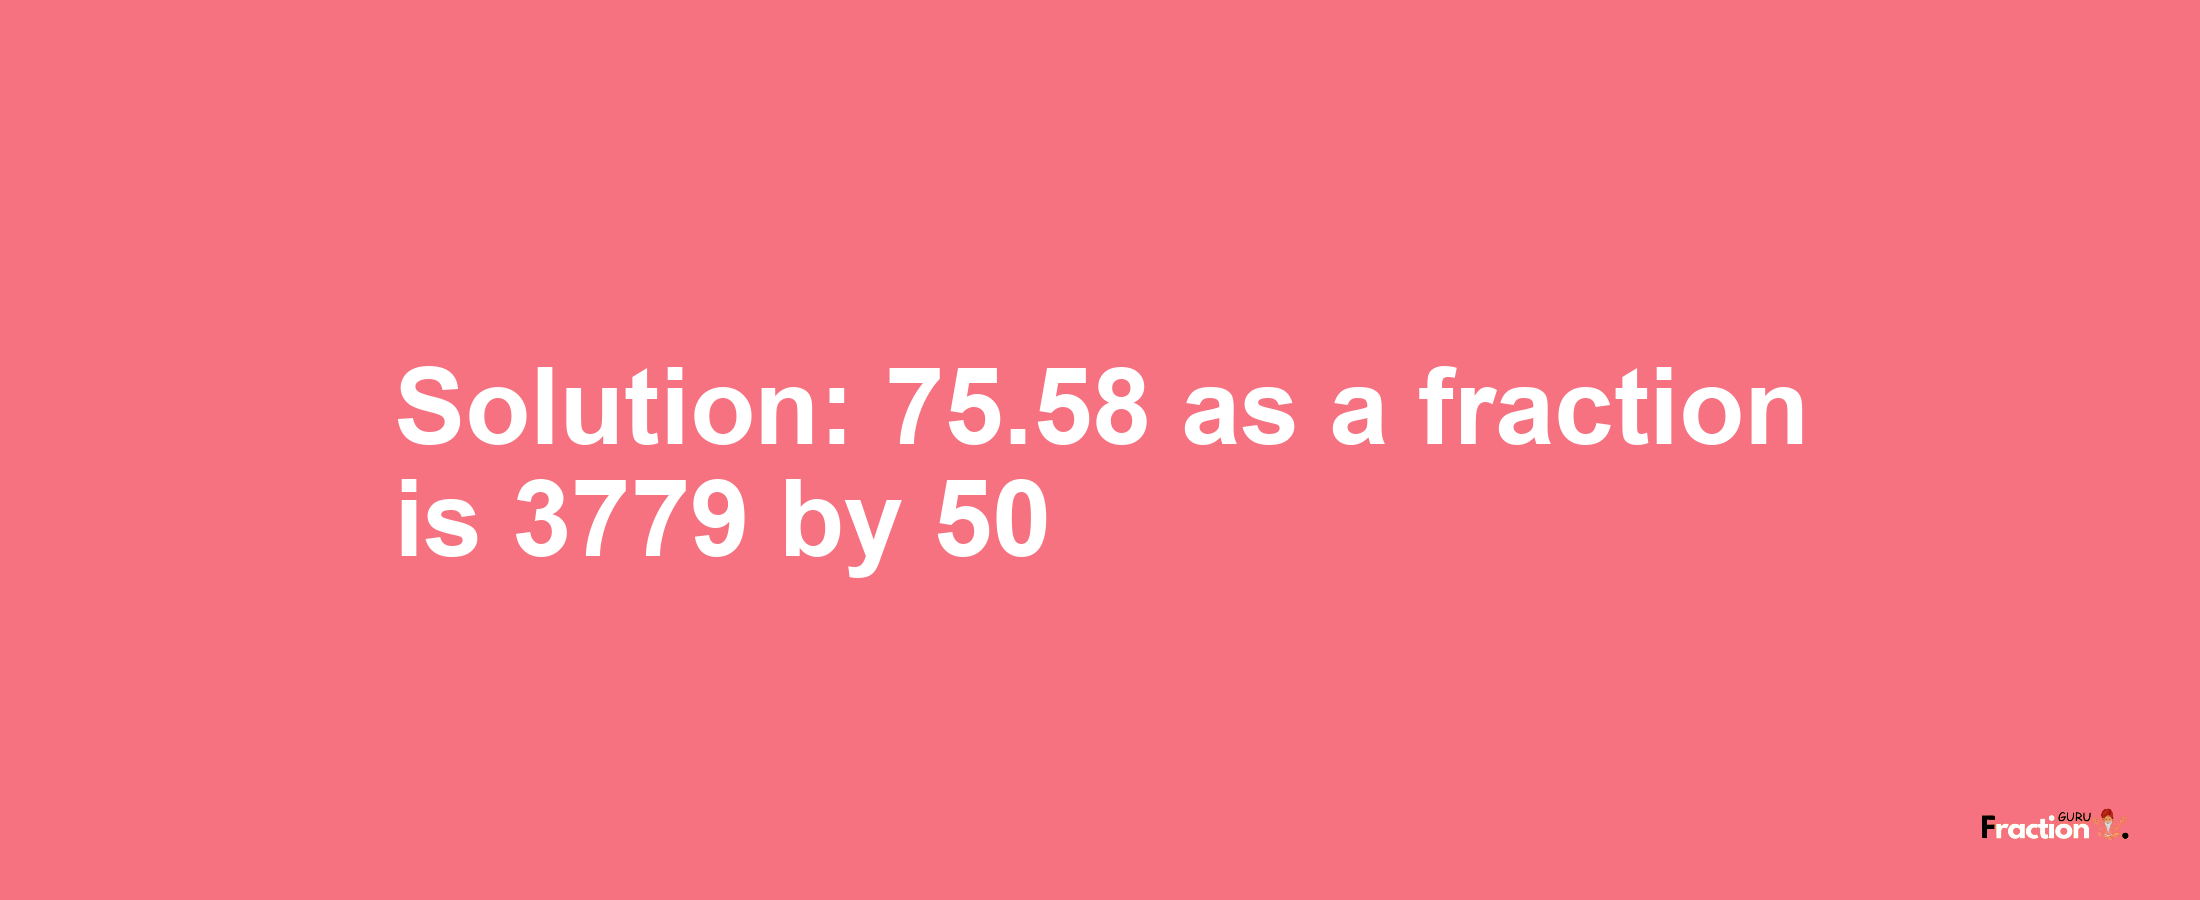 Solution:75.58 as a fraction is 3779/50